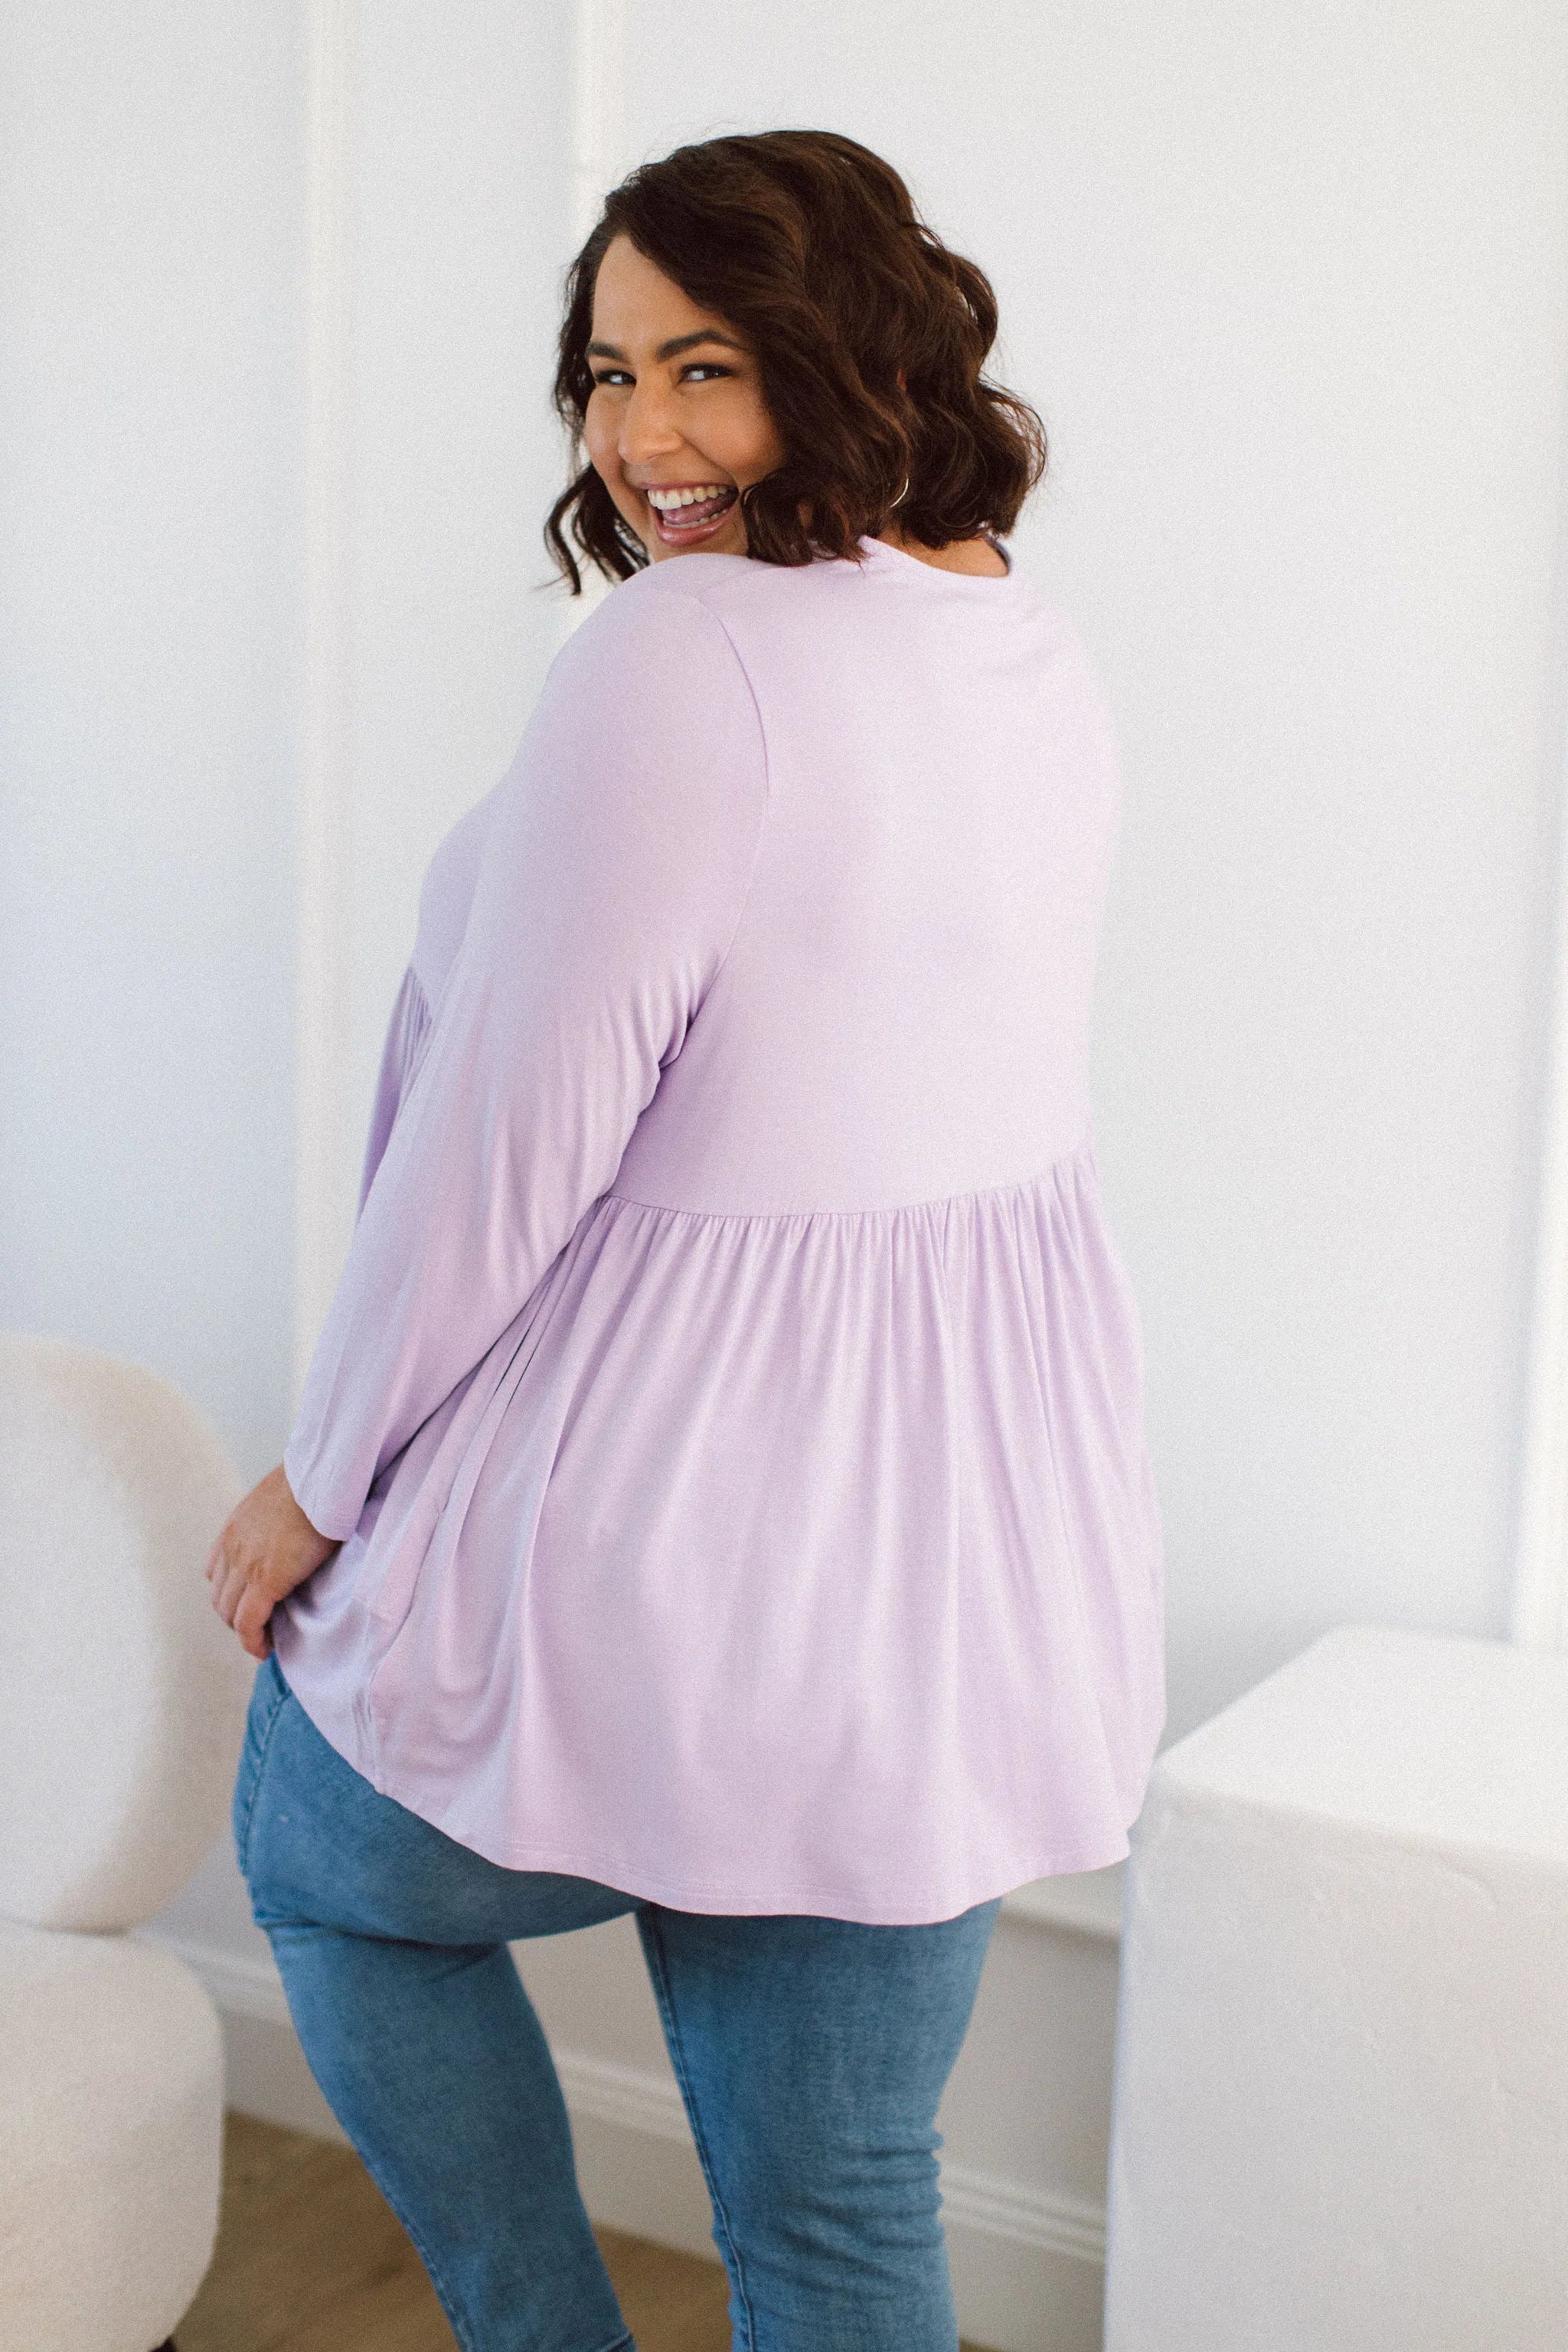 Plus Size clothing,  women modeling a Plus Size Tops, Lucy Long Sleeve Top in Purple Lilac